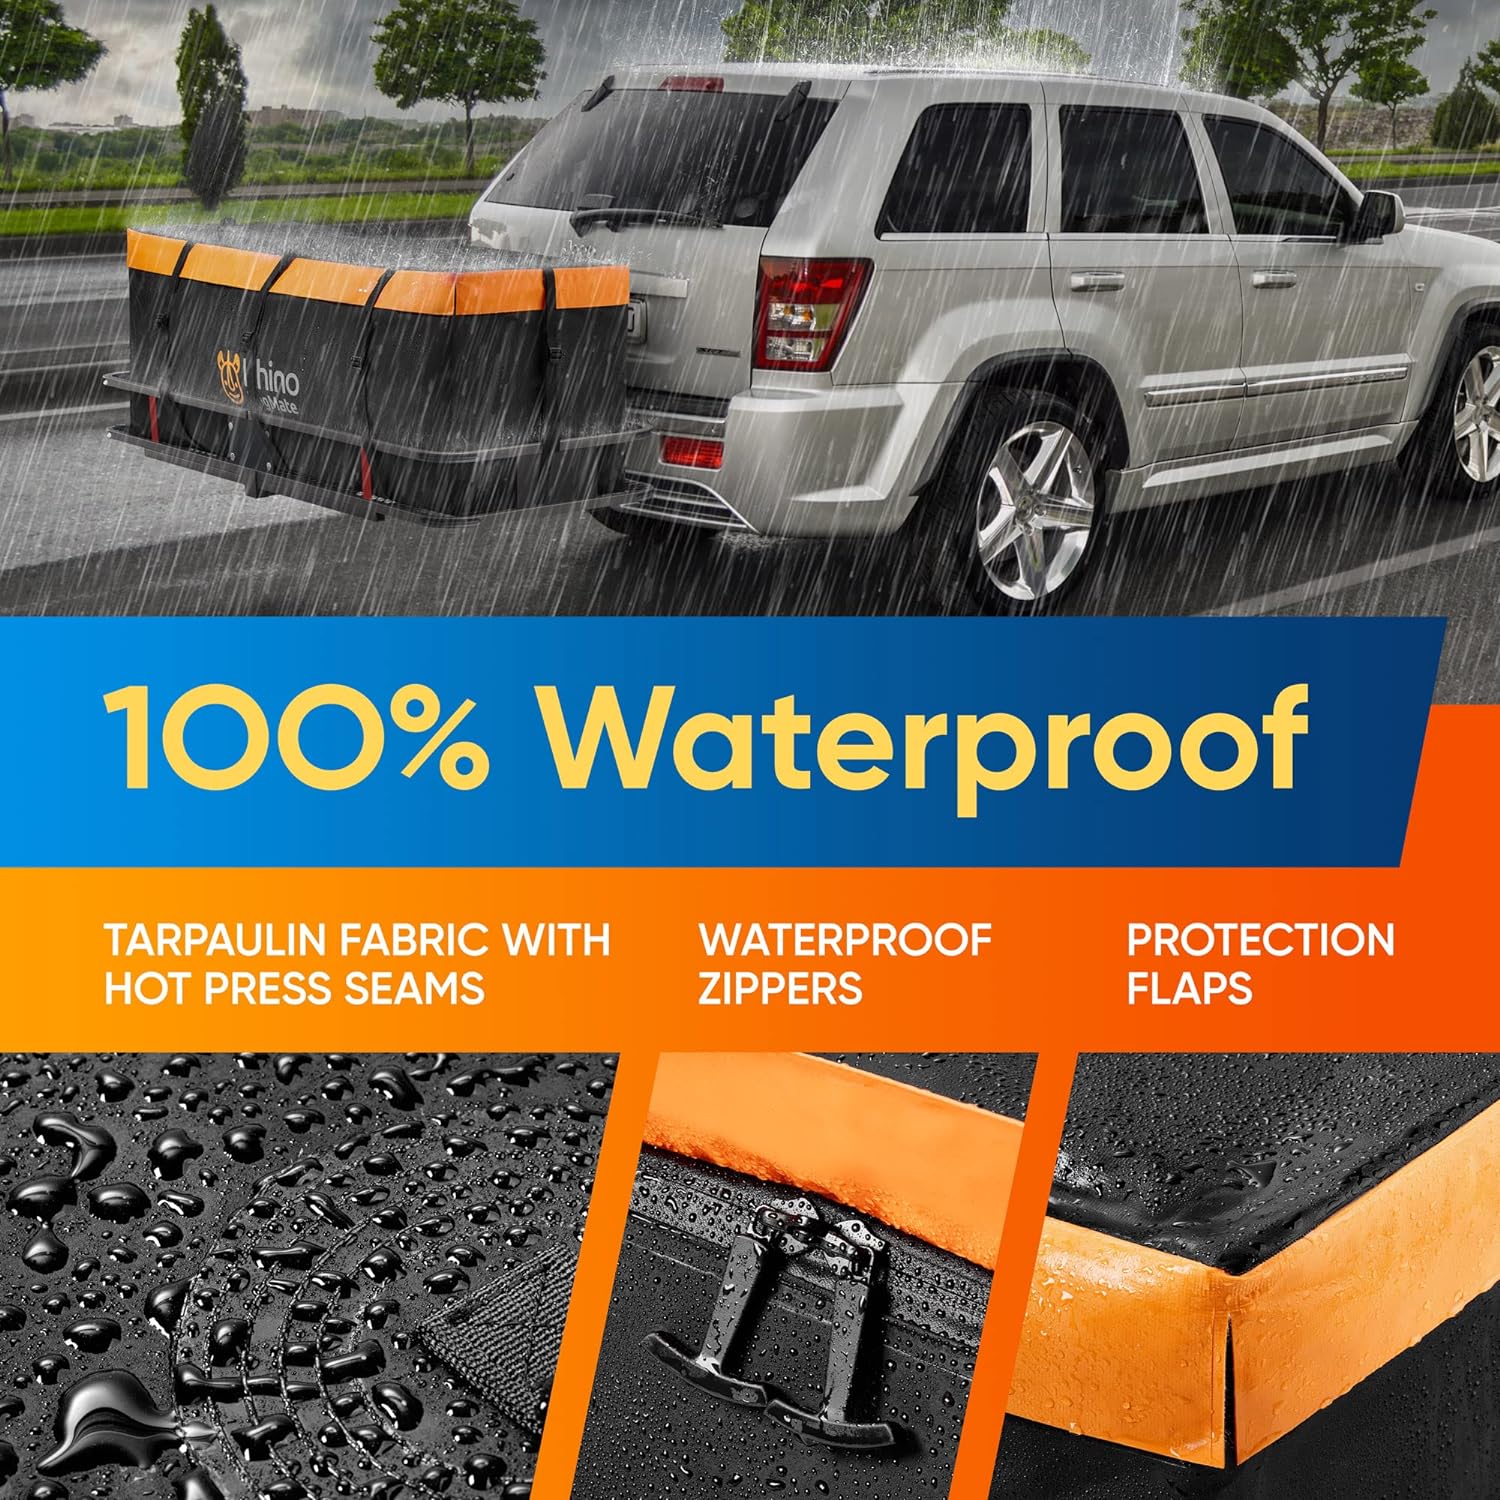 BagMate 565L Waterproof Hitch Cargo Carrier Bag - Durable PVC Tarpaulin Hitch Mount Cargo Carrier Cargo Box - Heavy-Duty Straps & Buckles